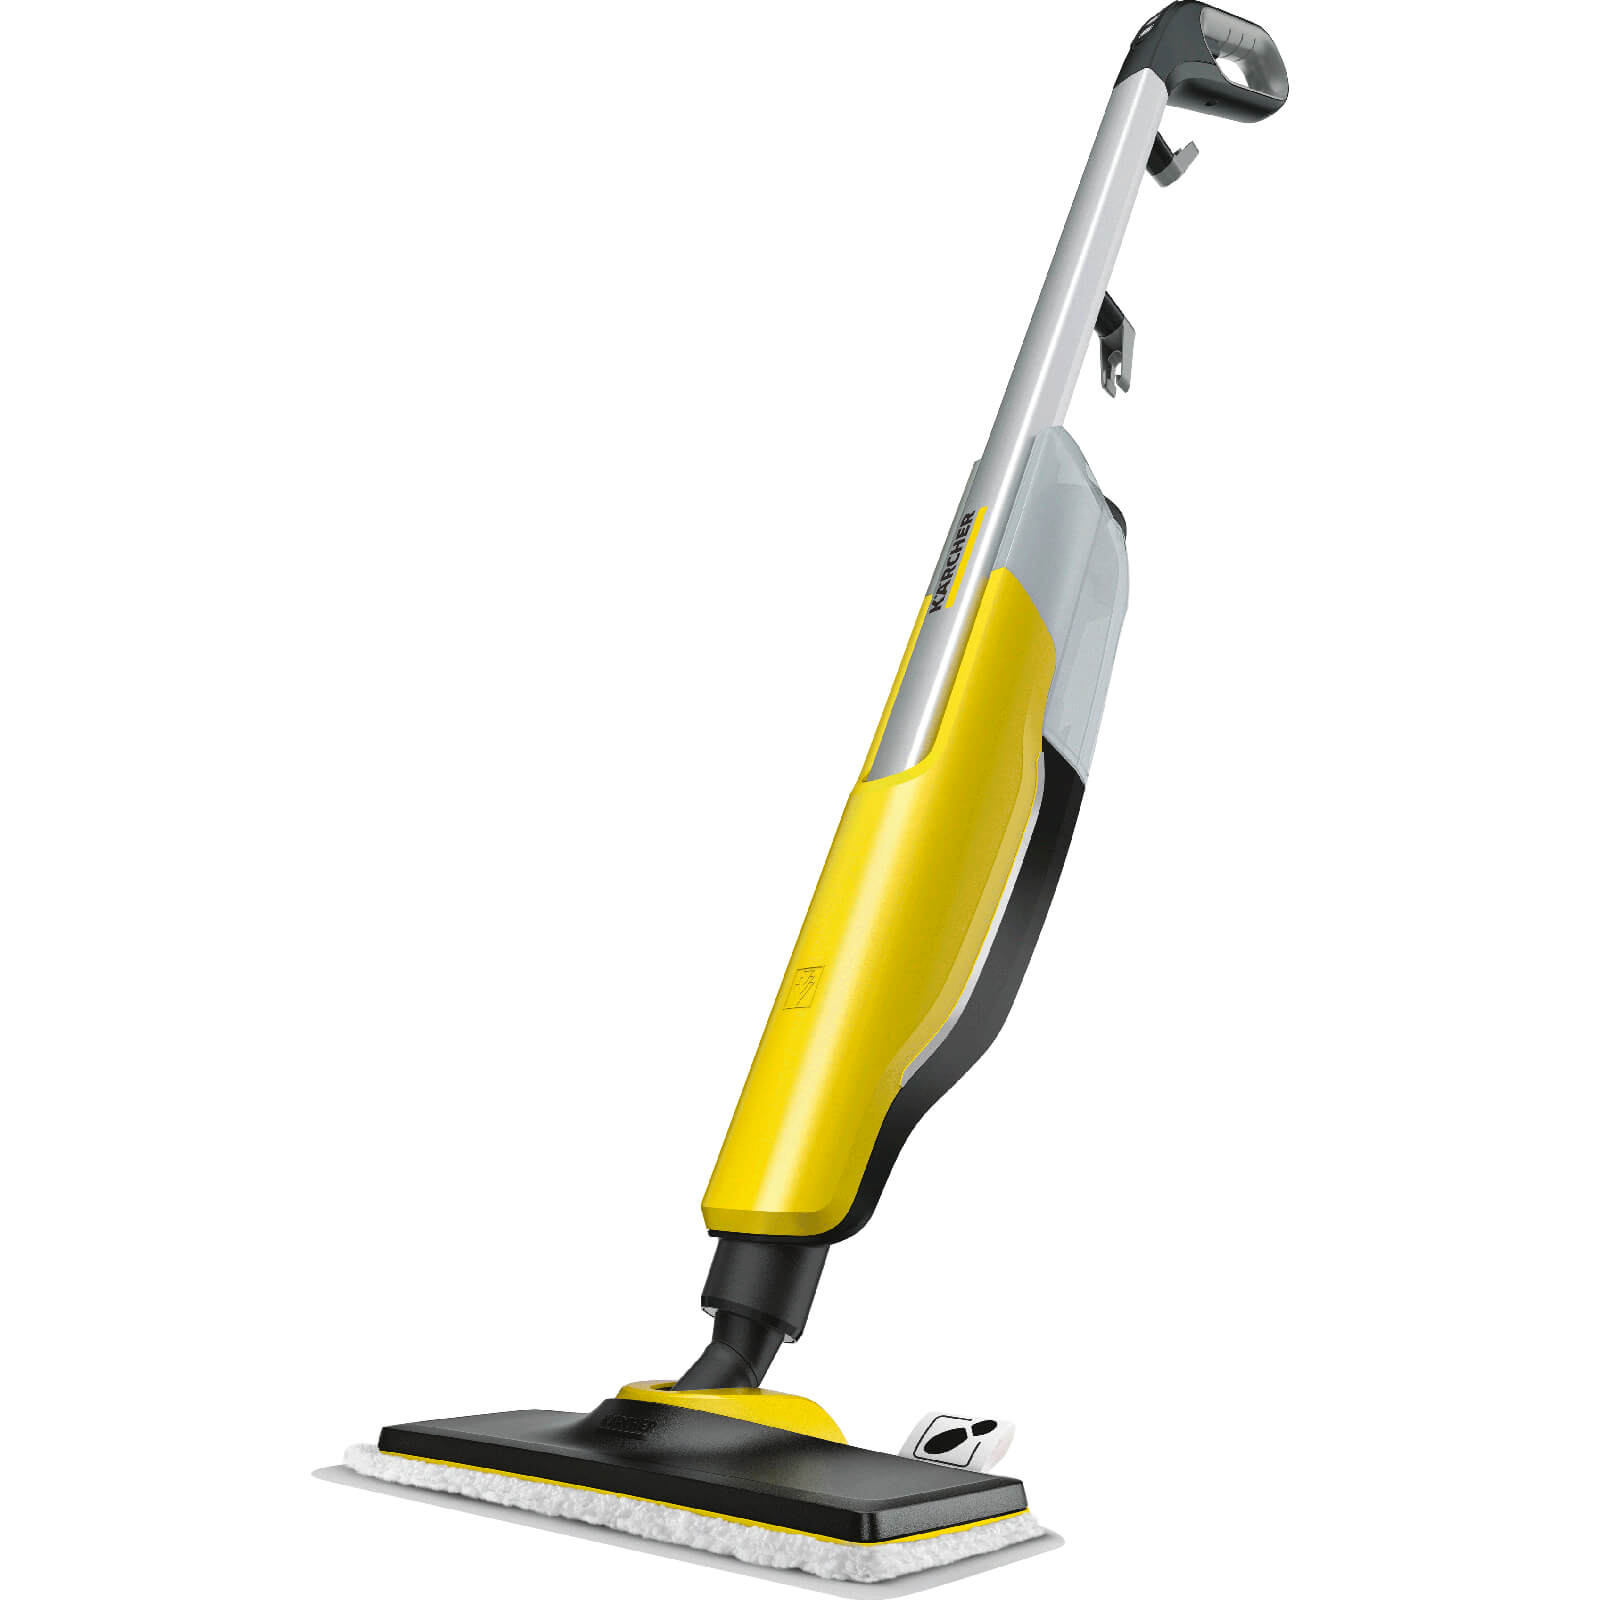 Kärcher SC2 Upright Easyfix Steam Mop with up to Minutes Run Time - Yellow